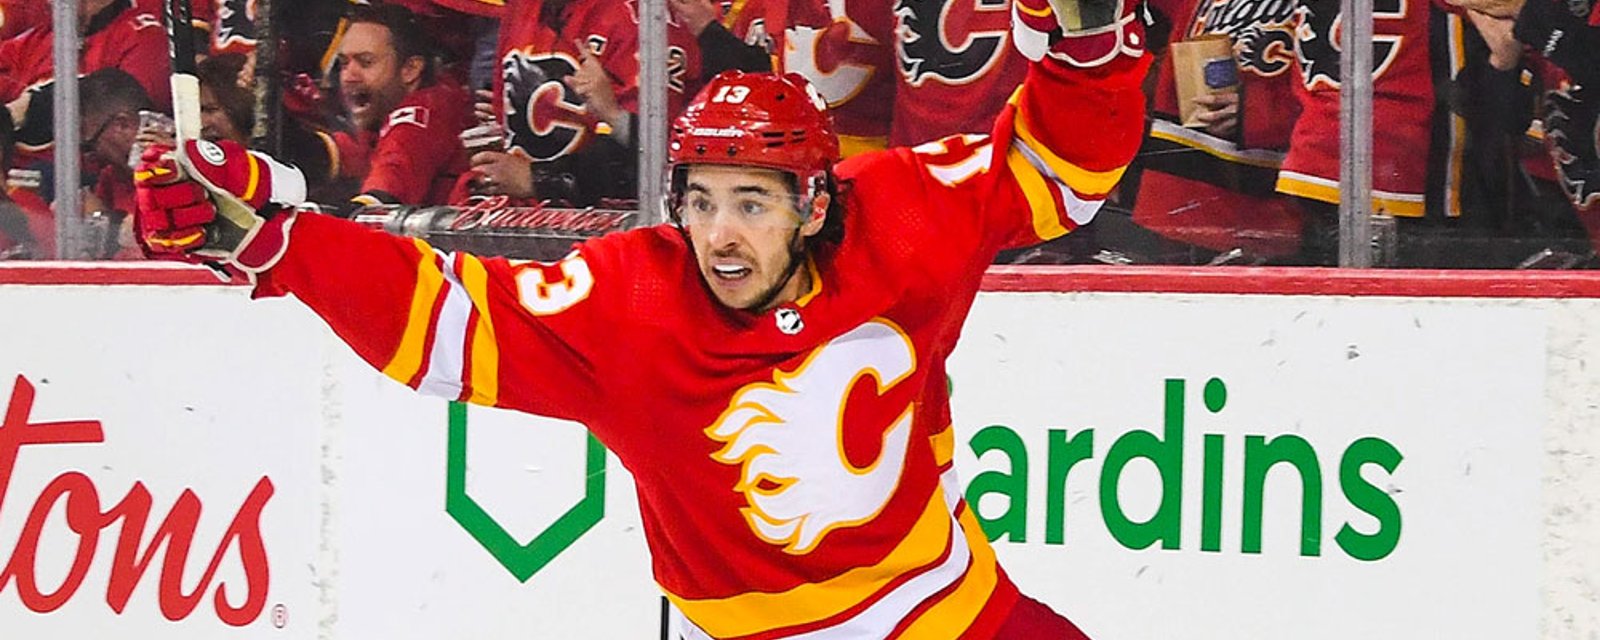 Johnny Gaudreau informs the Flames he won't be re-signing with them